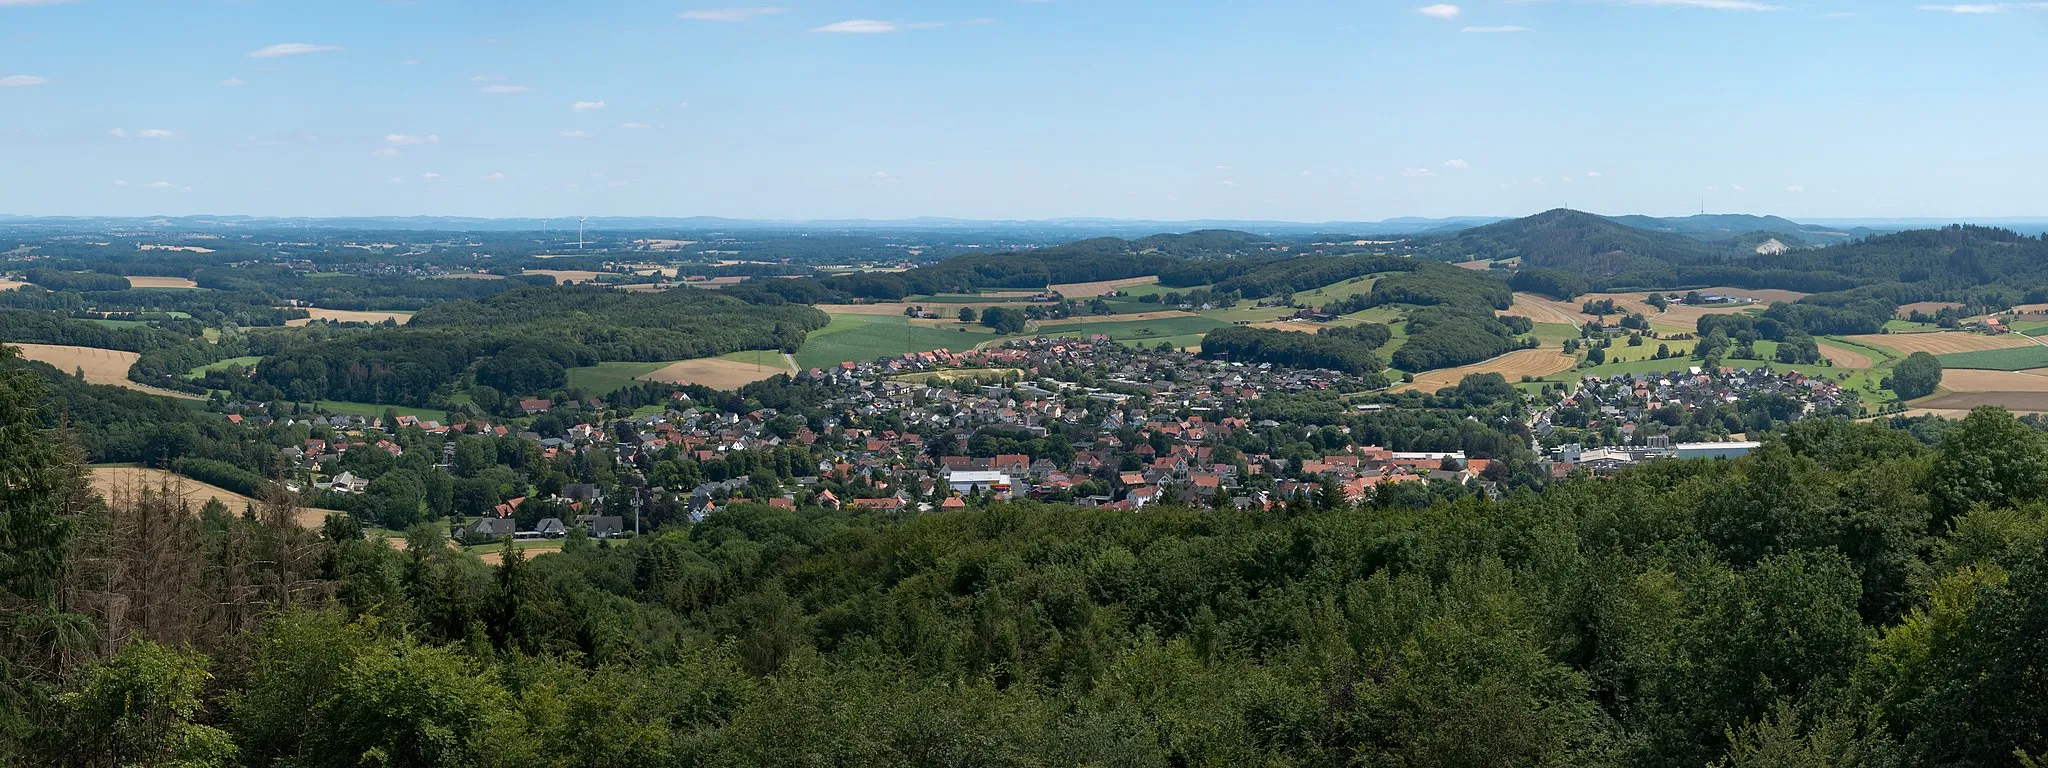 Photo showing: View from the lookout-tower Luisenturm on the Johannisegge to Borgholzhausen, Lippe uplands and Teutoburg Forest